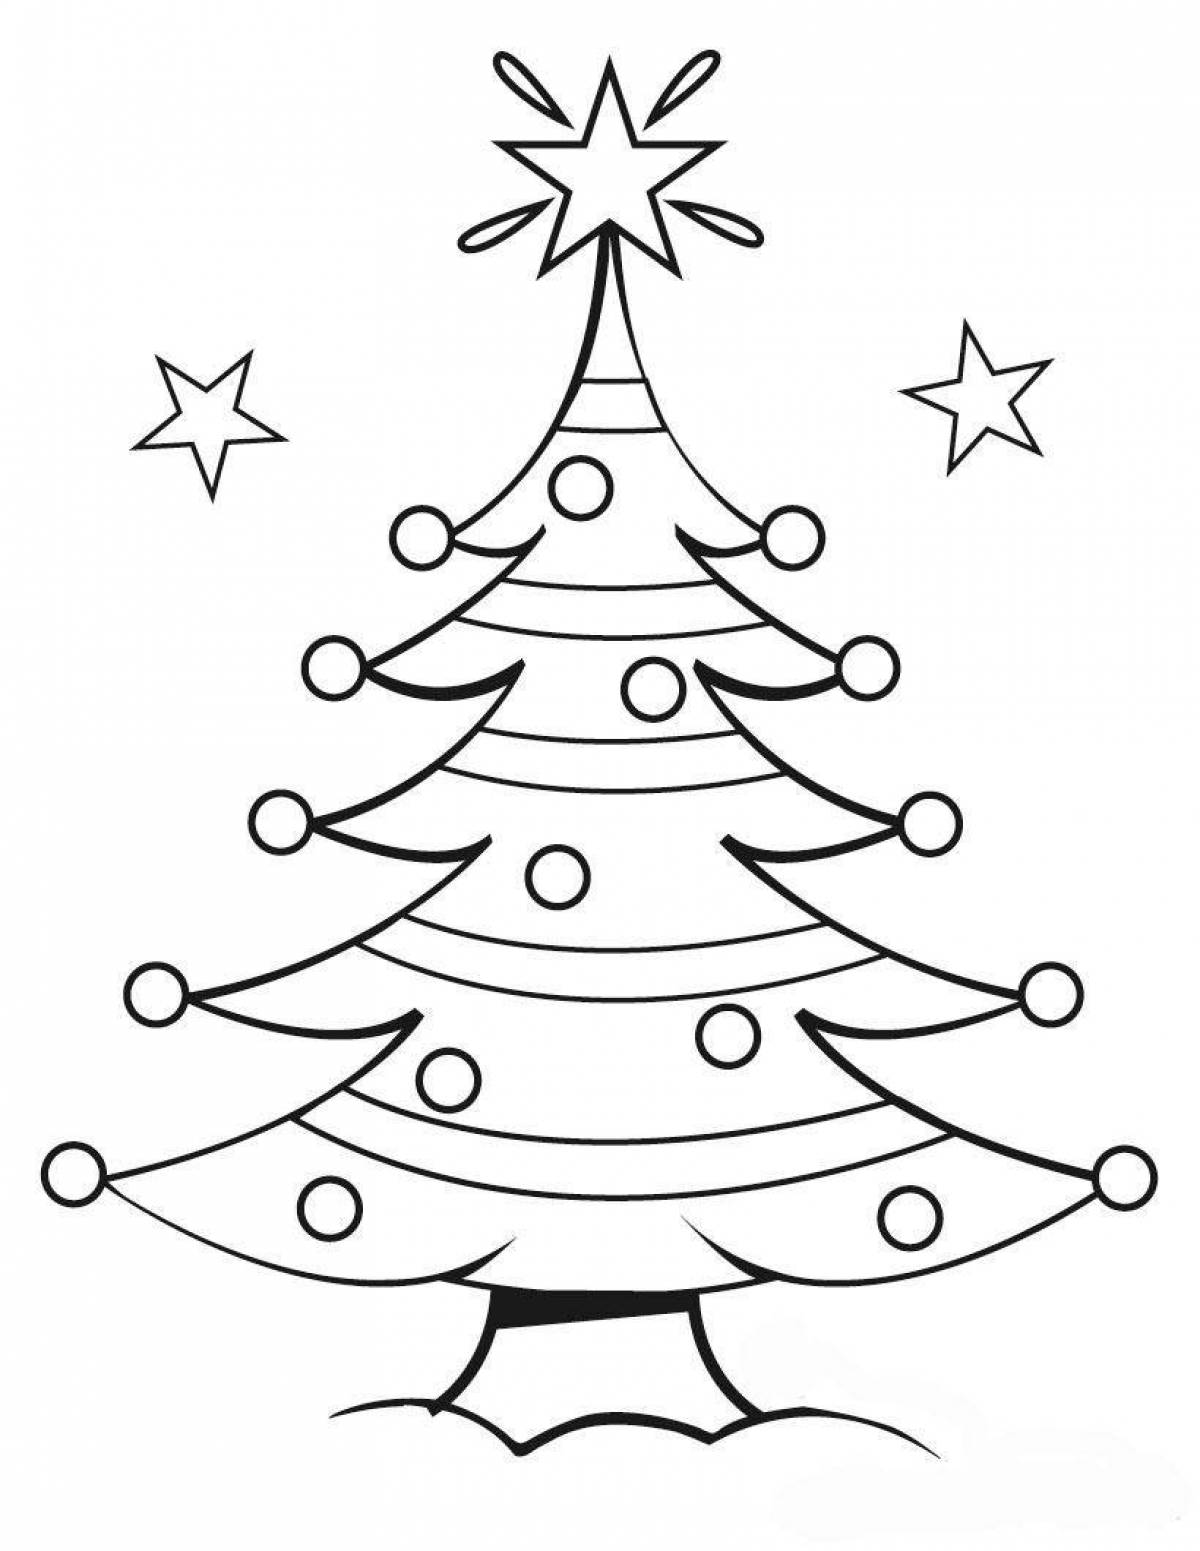 Coloring book joyful Christmas tree for children 4-5 years old